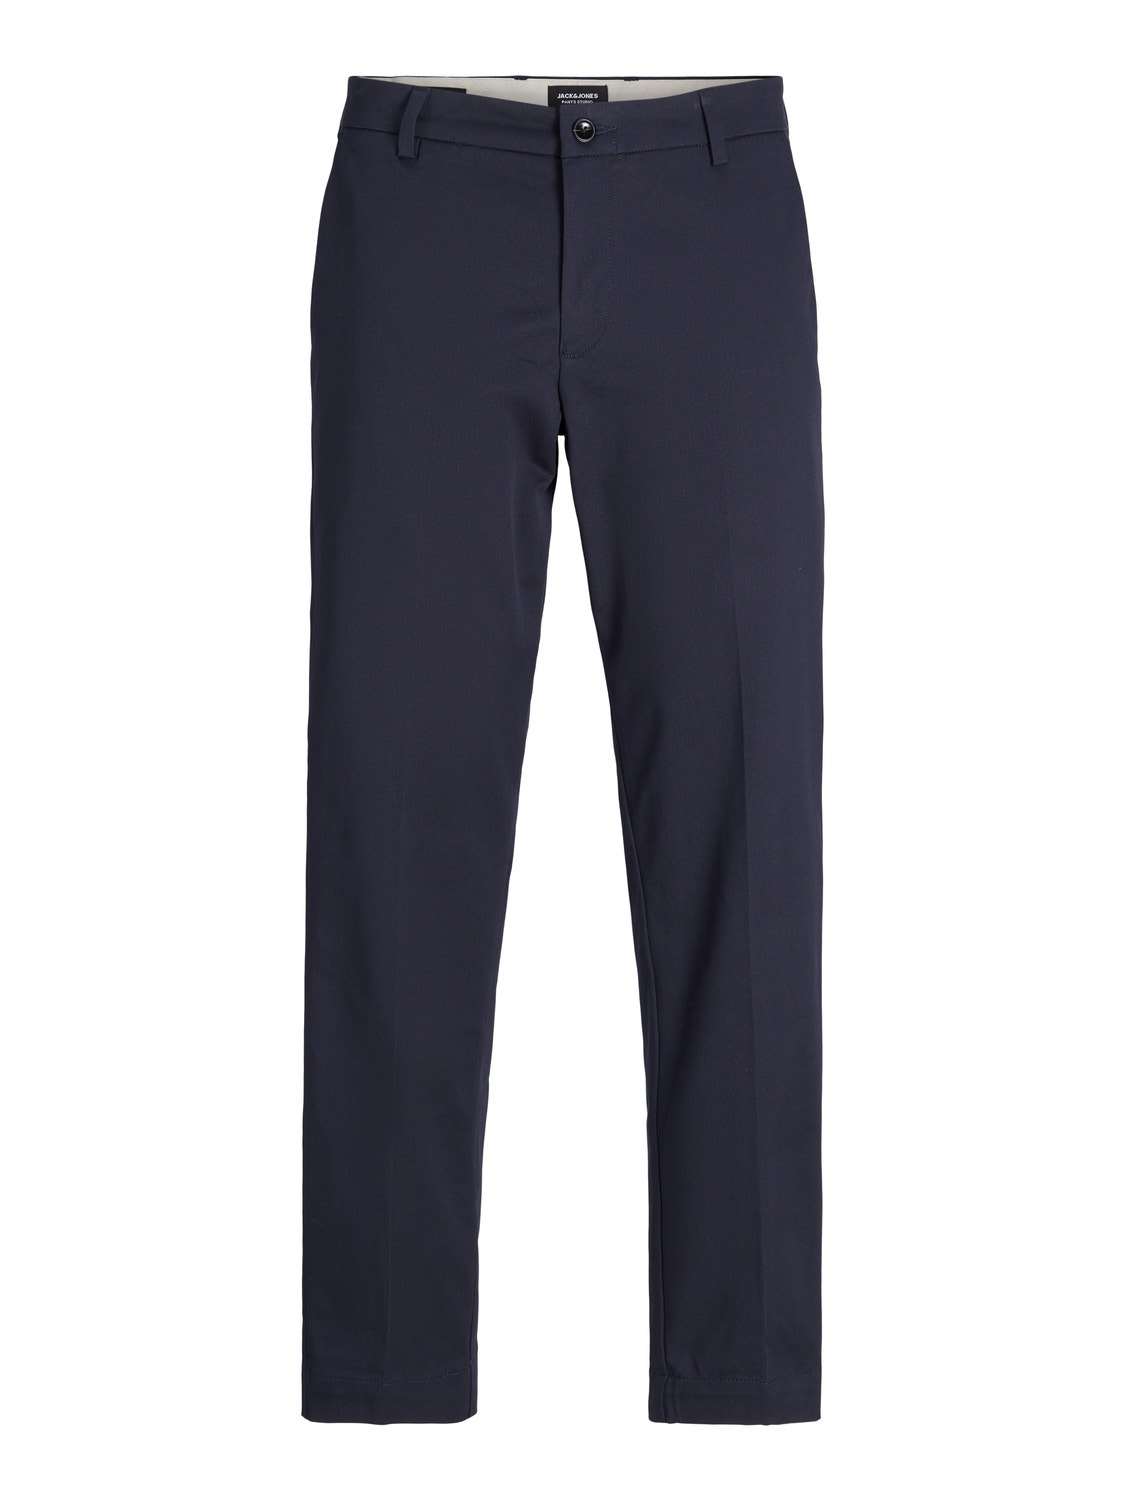 Jack & Jones Relaxed Fit Chino trousers -Dark Navy - 12253083